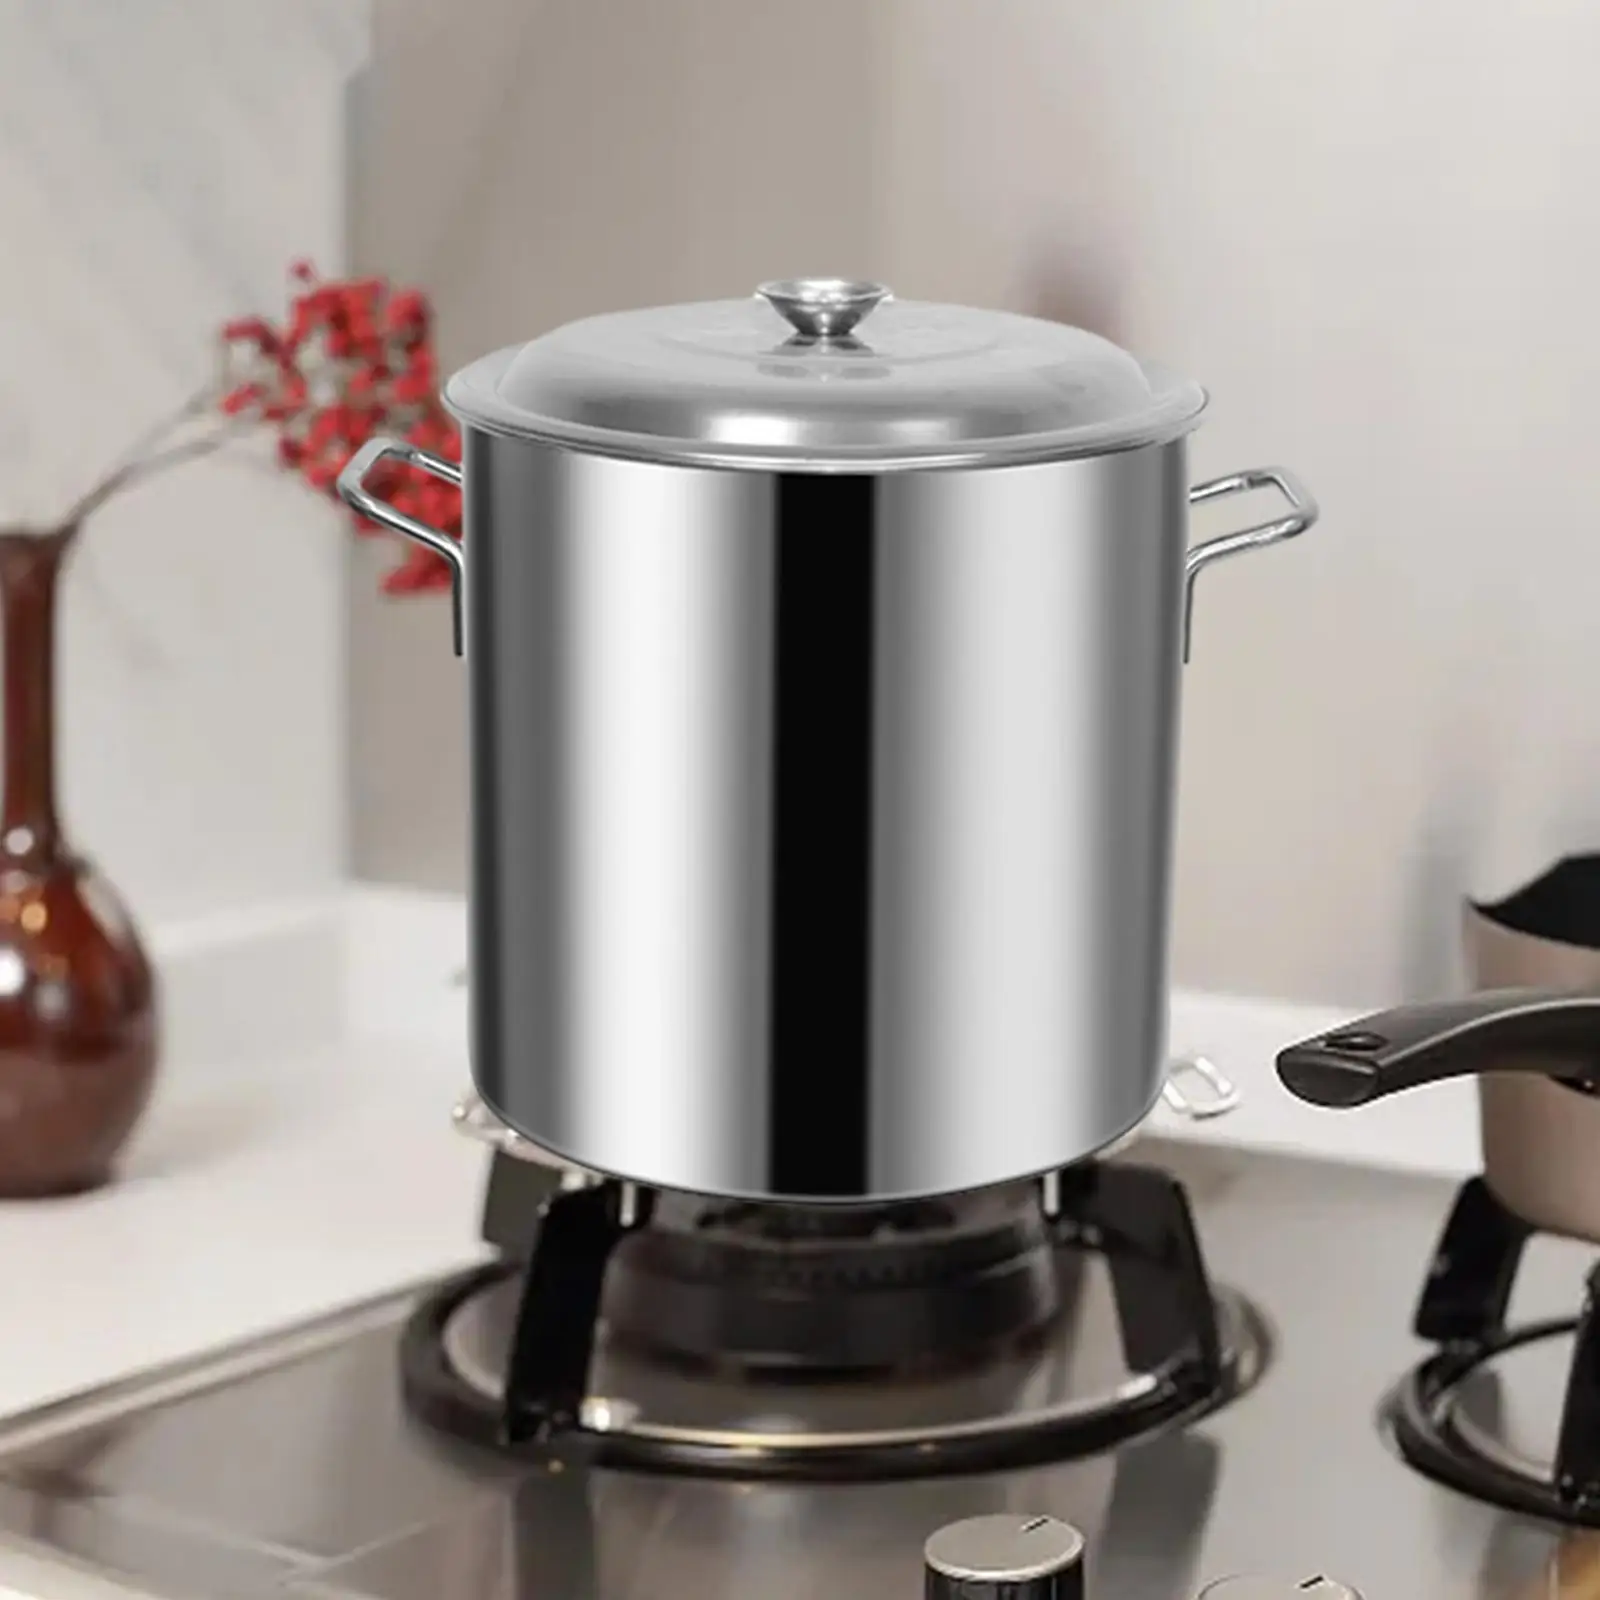 Cater Stew Soup Boiling Pan Double Handle Milk Tea Deep Pot with Lid Boiling Rice Composite Bottom Stockpot for Hotel Household